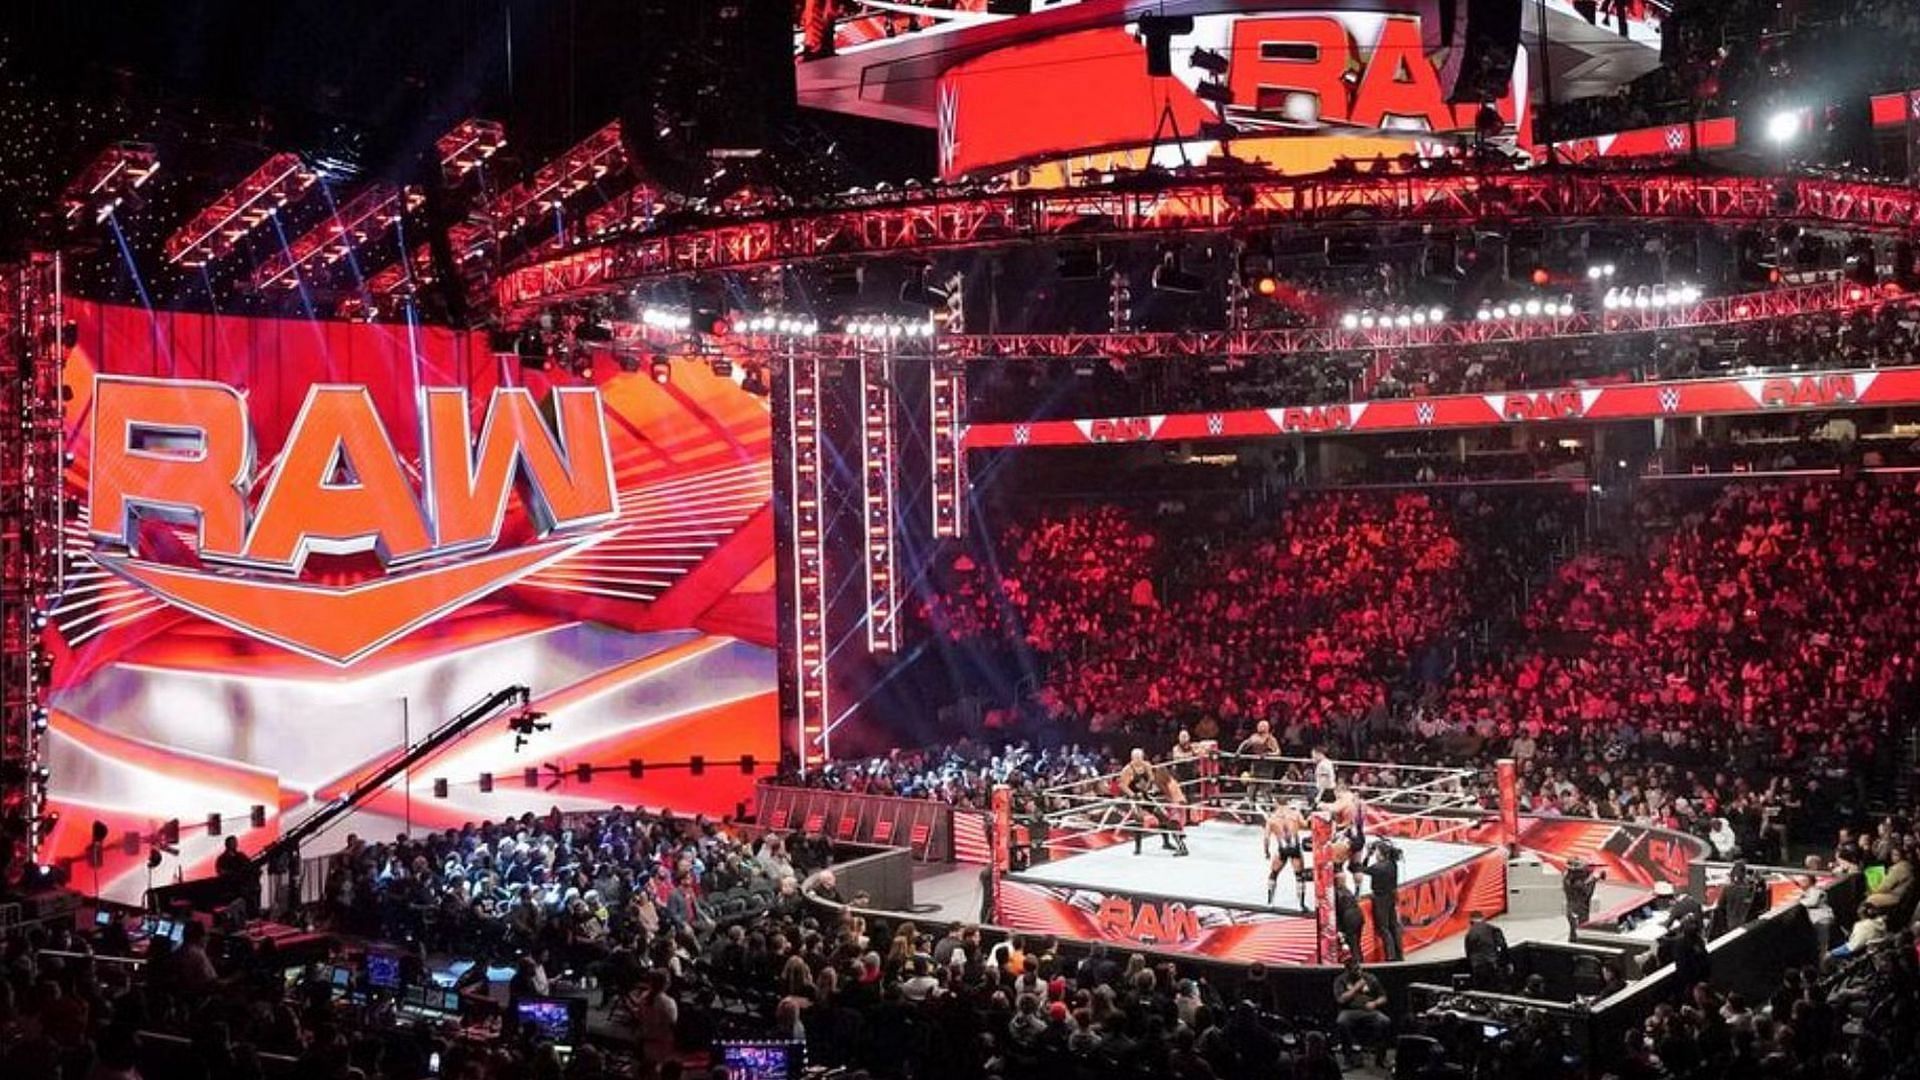 The WWE RAW logo and stage with ring inside arena